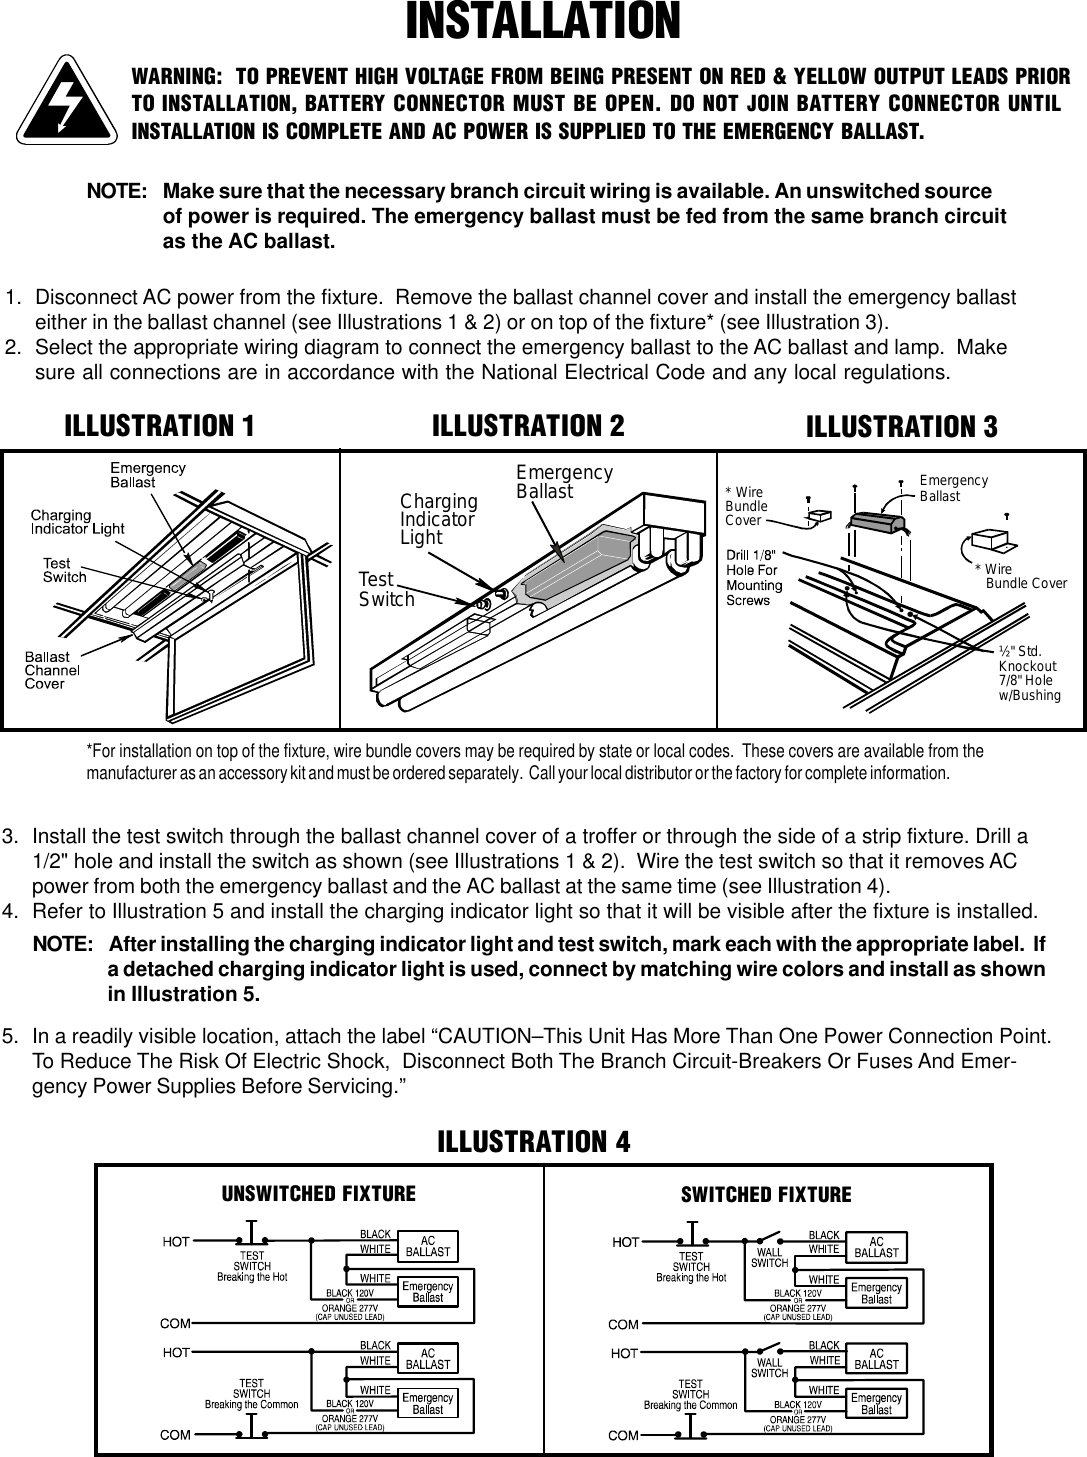 Page 2 of 4 - B100  Installation Directions